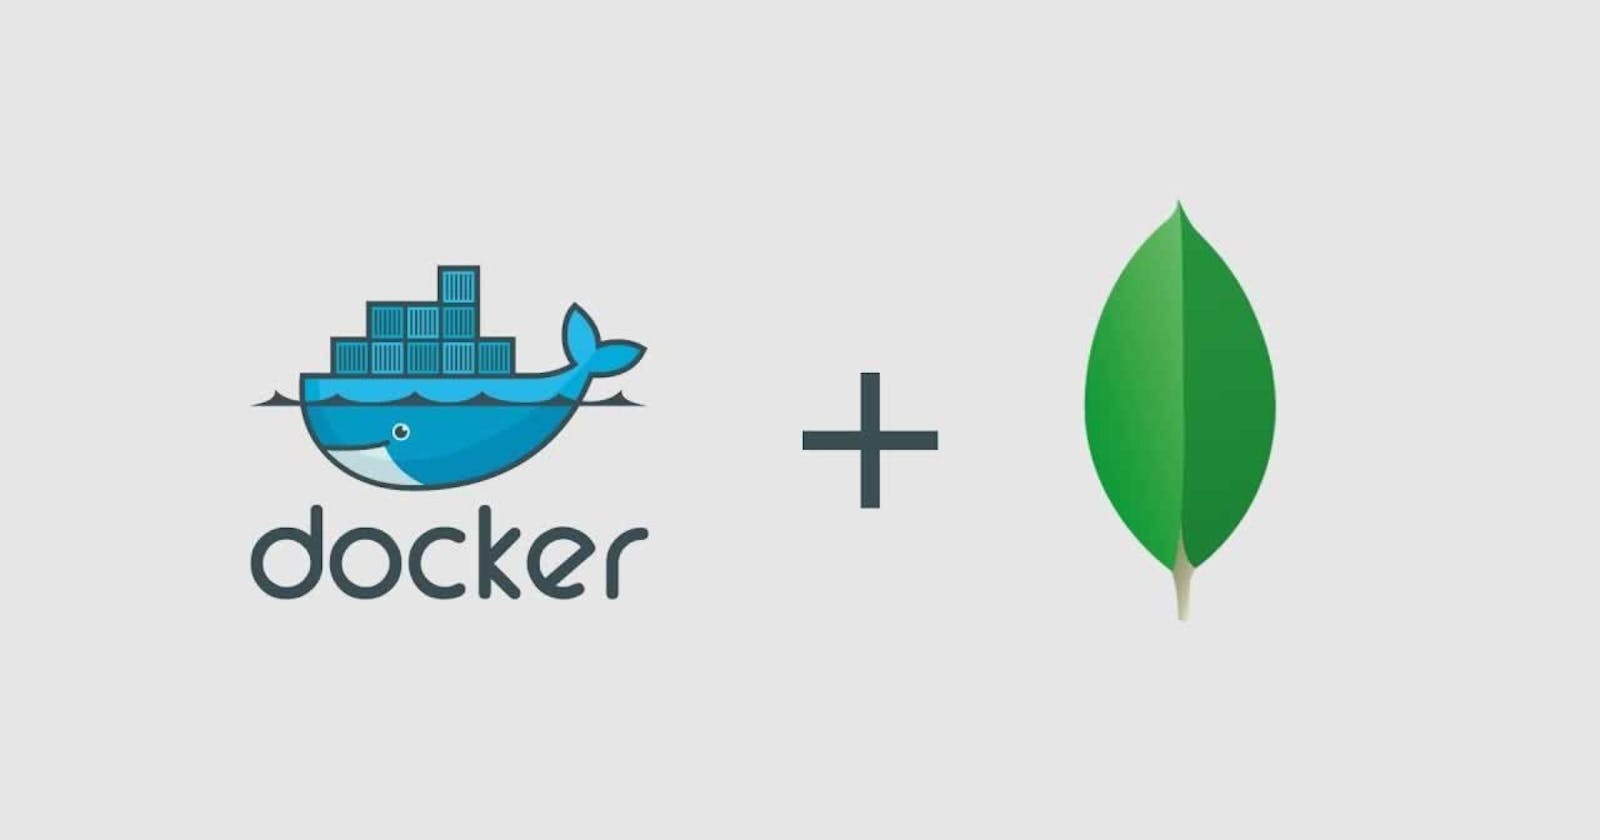 How to make your MongoDB container more secure?